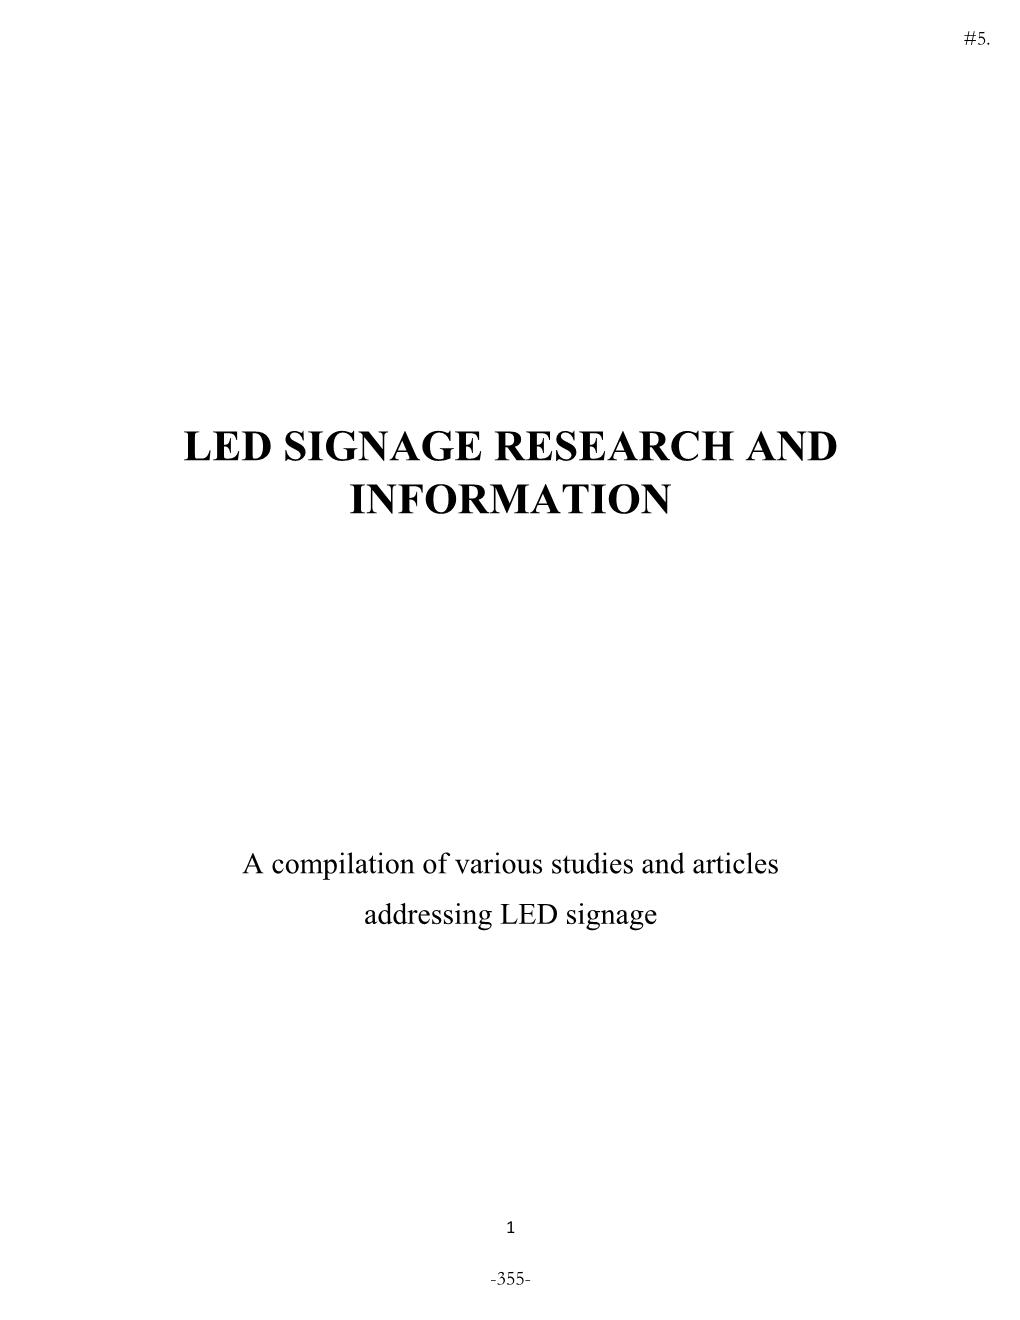 Led Signage Research and Information